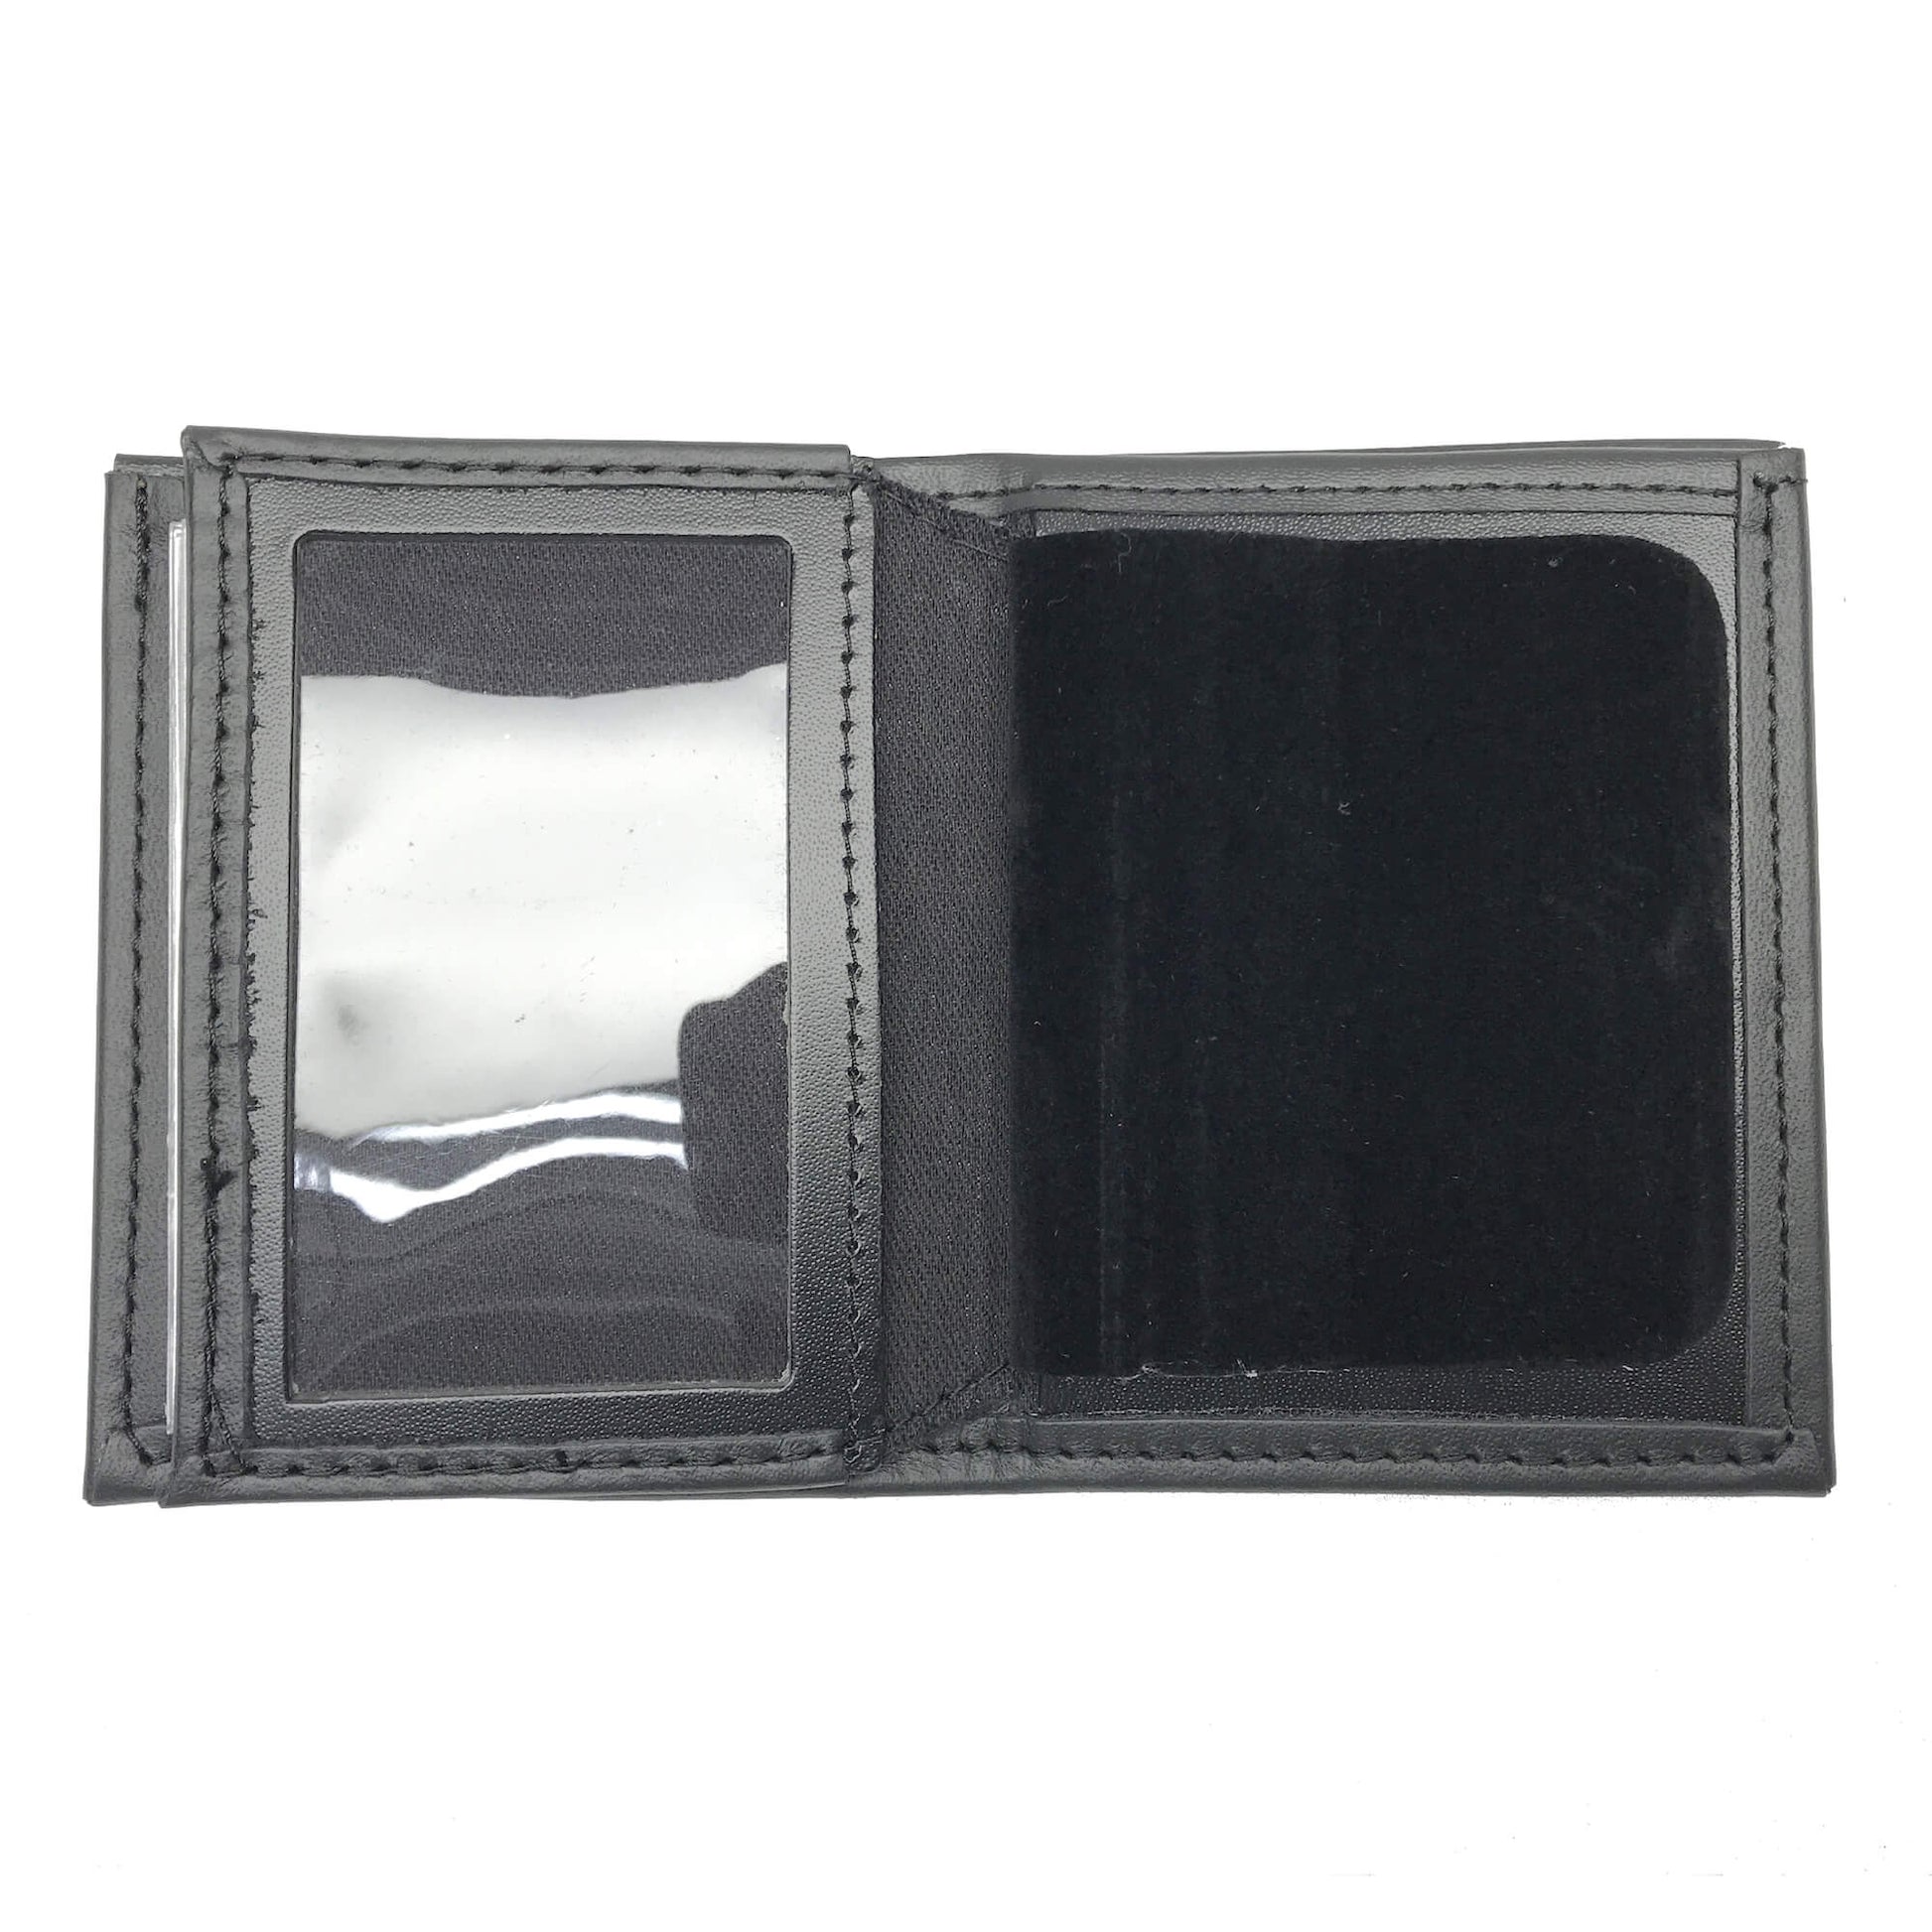 Naval Criminal Investigative Service - NCIS Special Agent Bifold Hidden Badge Wallet-Perfect Fit-911 Duty Gear USA